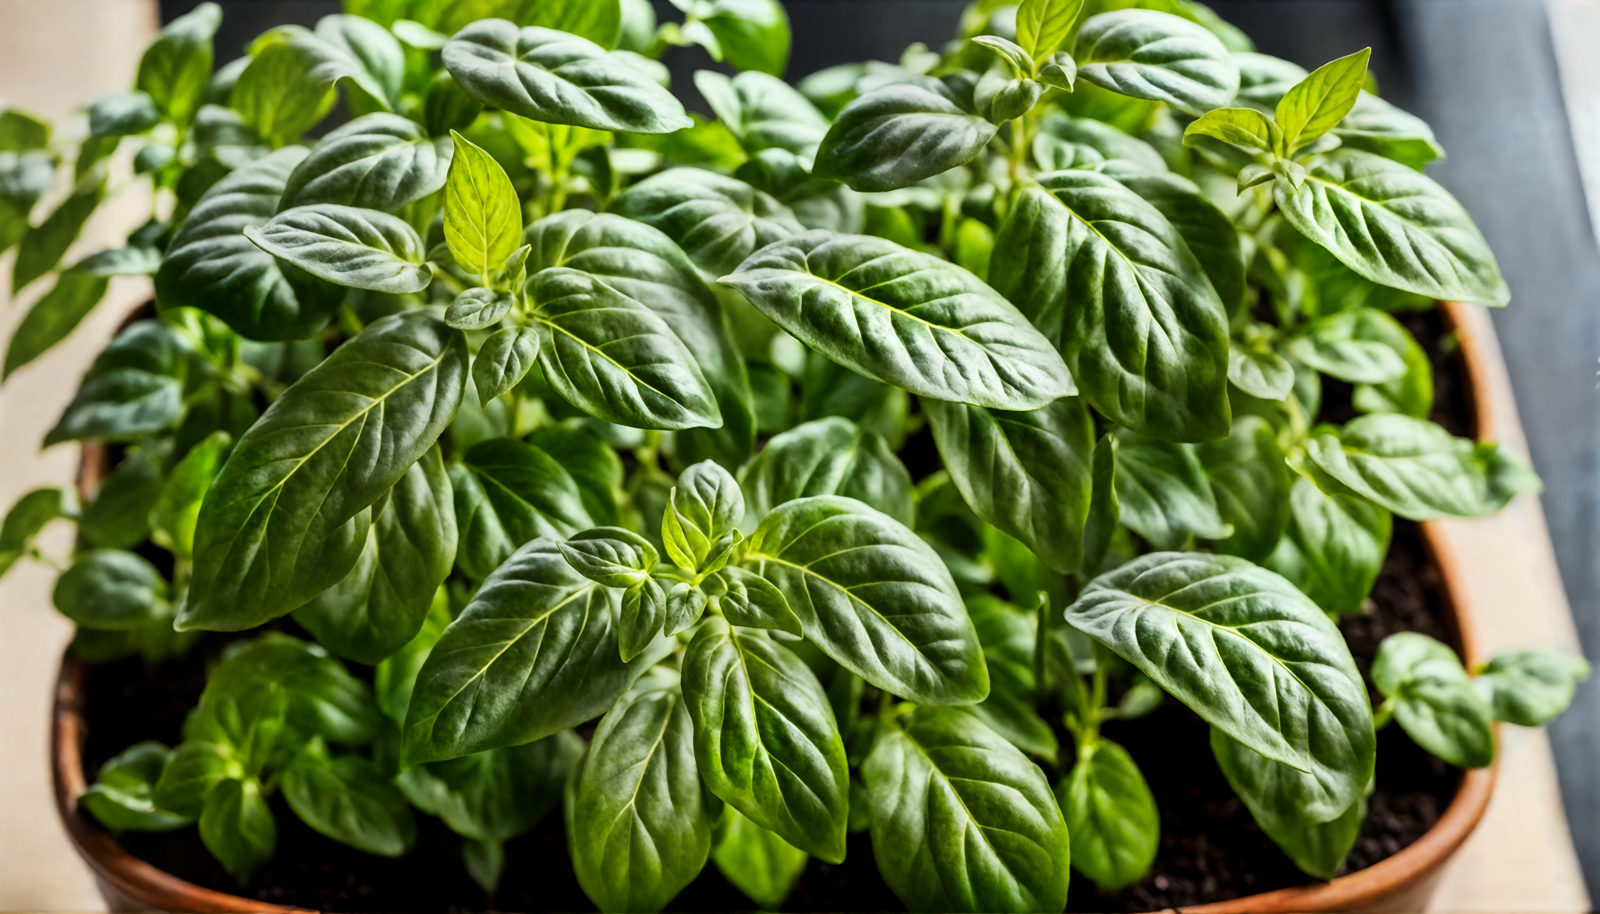 A hyper-realistic Ocimum basilicum (basil) plant in a bowl, with lush leaves, against a dark background.